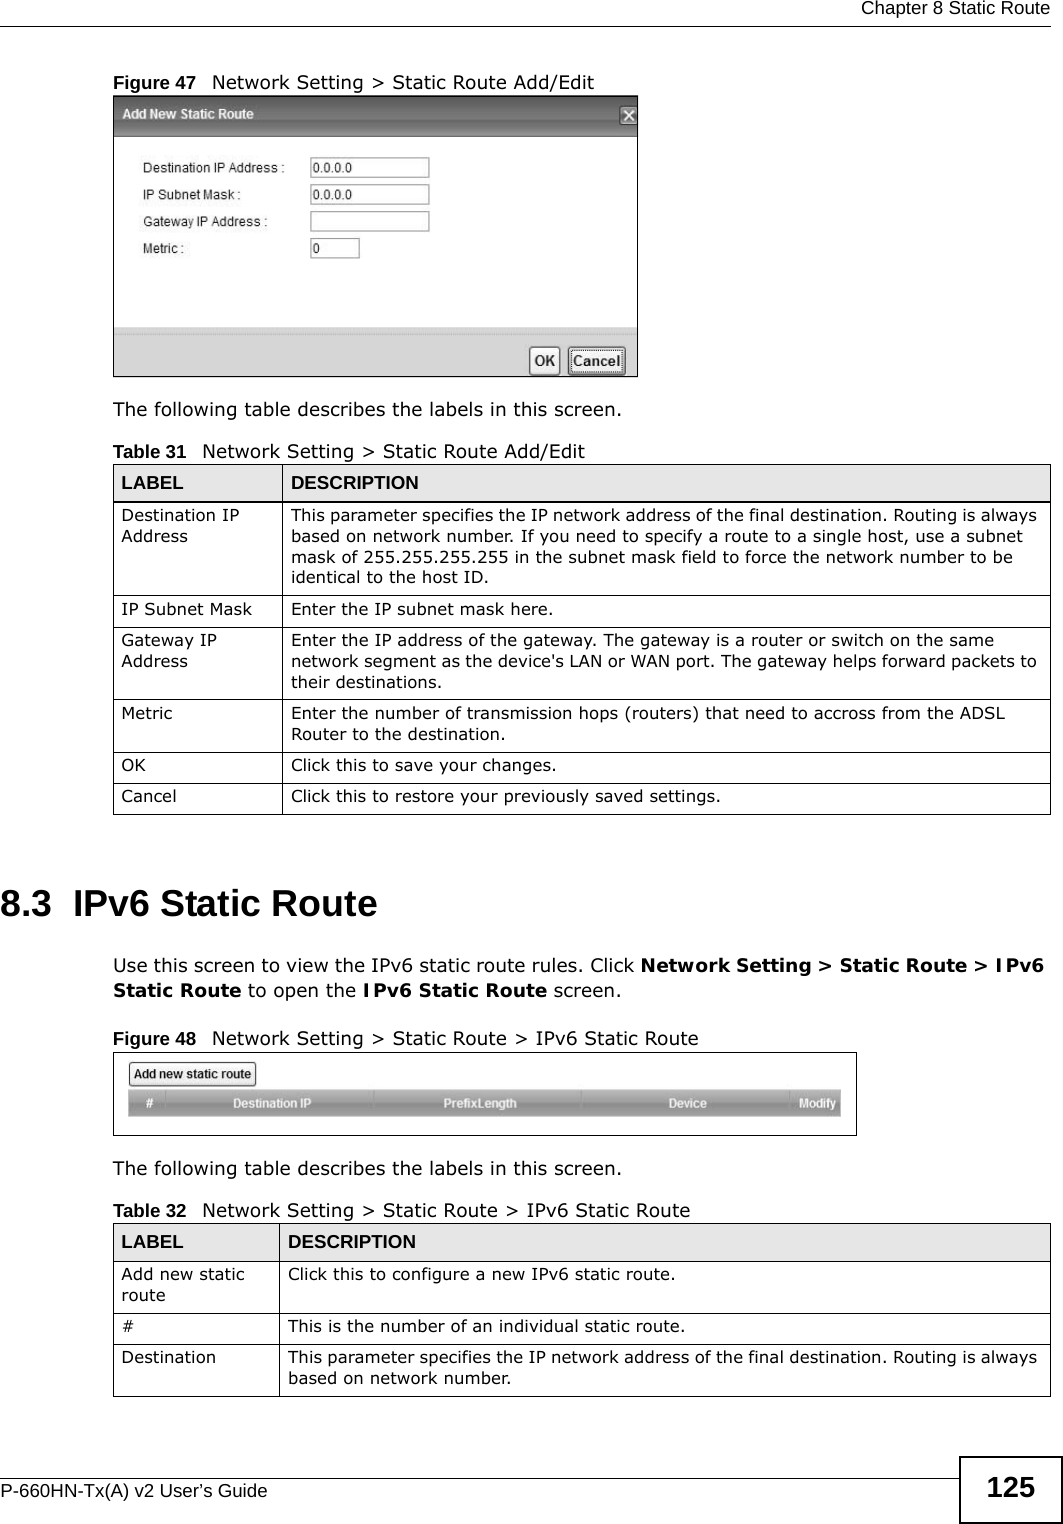  Chapter 8 Static RouteP-660HN-Tx(A) v2 User’s Guide 125Figure 47   Network Setting &gt; Static Route Add/EditThe following table describes the labels in this screen. 8.3  IPv6 Static RouteUse this screen to view the IPv6 static route rules. Click Network Setting &gt; Static Route &gt; IPv6 Static Route to open the IPv6 Static Route screen.Figure 48   Network Setting &gt; Static Route &gt; IPv6 Static RouteThe following table describes the labels in this screen. Table 31   Network Setting &gt; Static Route Add/EditLABEL DESCRIPTIONDestination IP AddressThis parameter specifies the IP network address of the final destination. Routing is always based on network number. If you need to specify a route to a single host, use a subnet mask of 255.255.255.255 in the subnet mask field to force the network number to be identical to the host ID.IP Subnet Mask  Enter the IP subnet mask here.Gateway IP AddressEnter the IP address of the gateway. The gateway is a router or switch on the same network segment as the device&apos;s LAN or WAN port. The gateway helps forward packets to their destinations.Metric Enter the number of transmission hops (routers) that need to accross from the ADSL Router to the destination.OK Click this to save your changes.Cancel Click this to restore your previously saved settings.Table 32   Network Setting &gt; Static Route &gt; IPv6 Static RouteLABEL DESCRIPTIONAdd new static routeClick this to configure a new IPv6 static route.#This is the number of an individual static route.Destination This parameter specifies the IP network address of the final destination. Routing is always based on network number. 